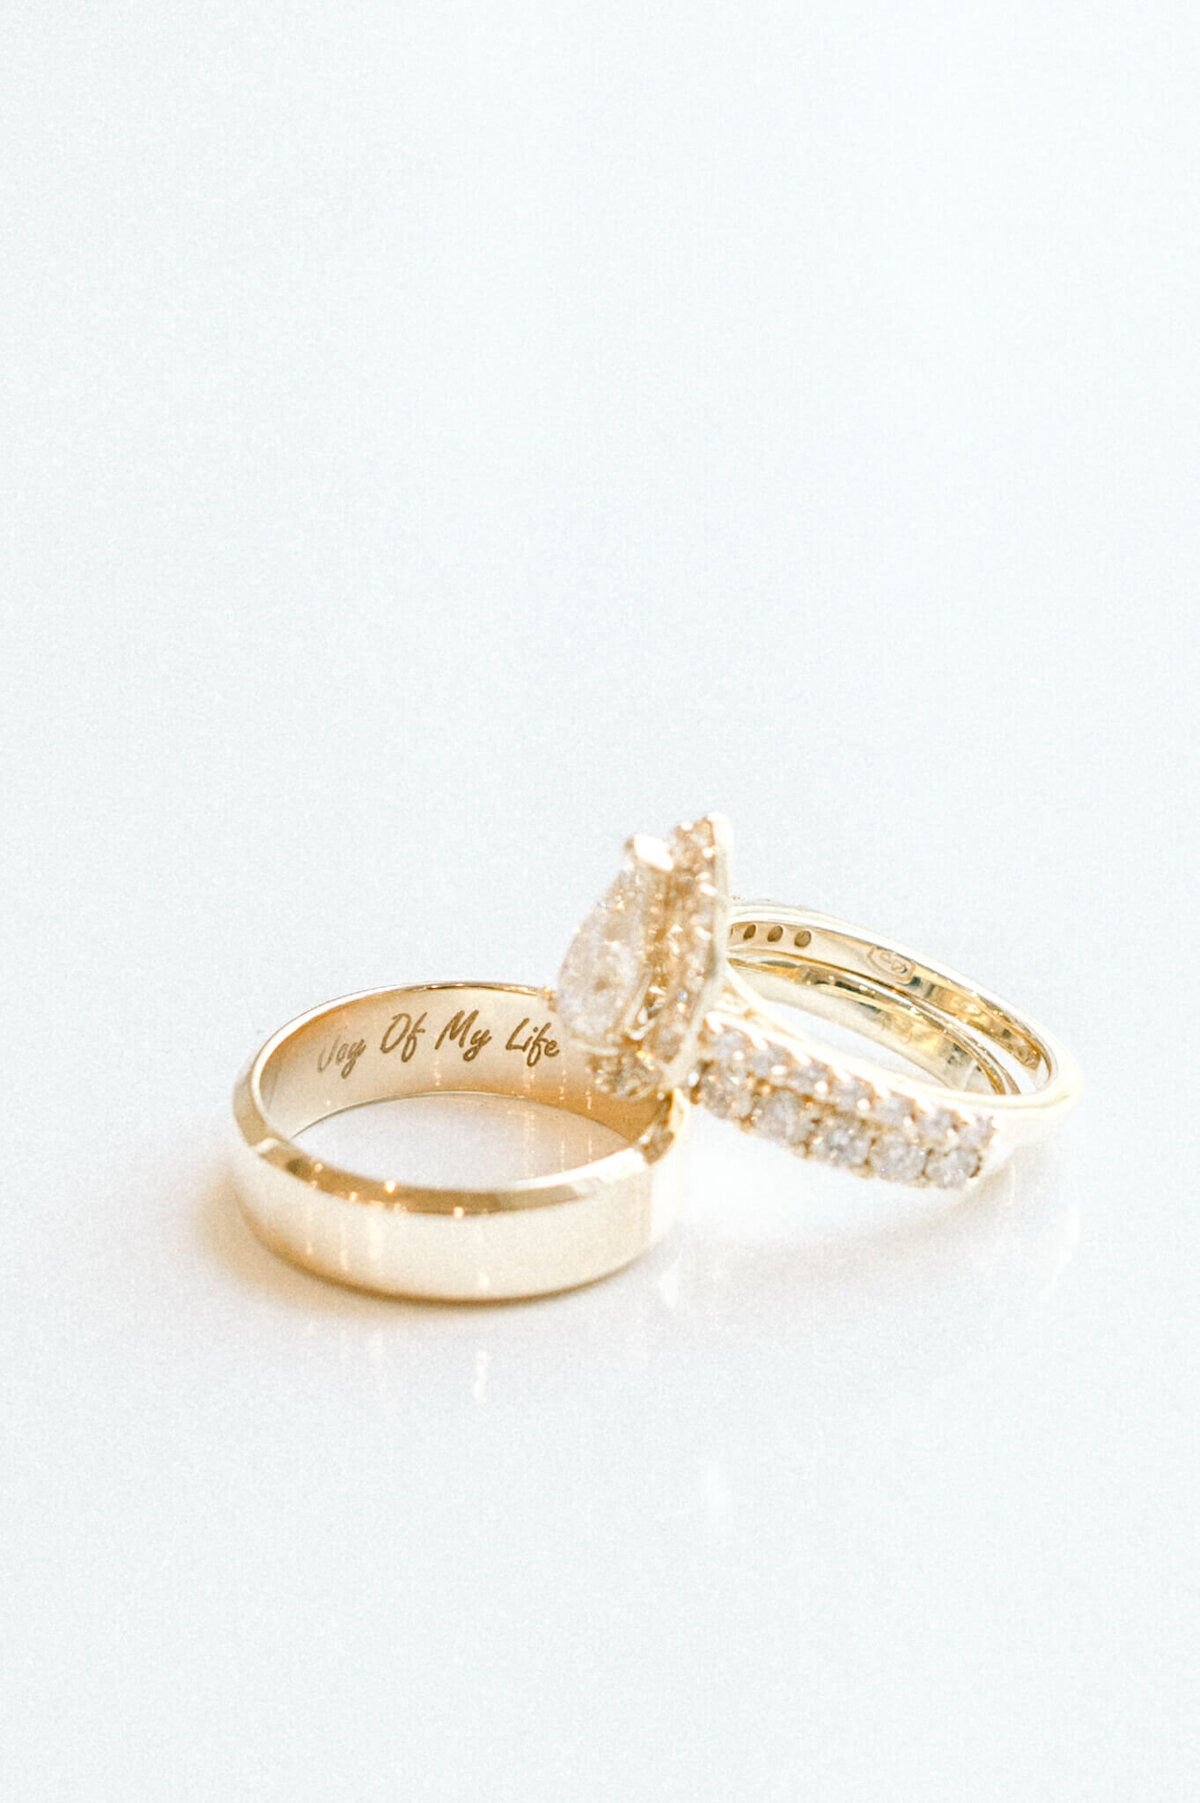 bride and groom wedding rings on white background with the inscription joy of my life inside one ring